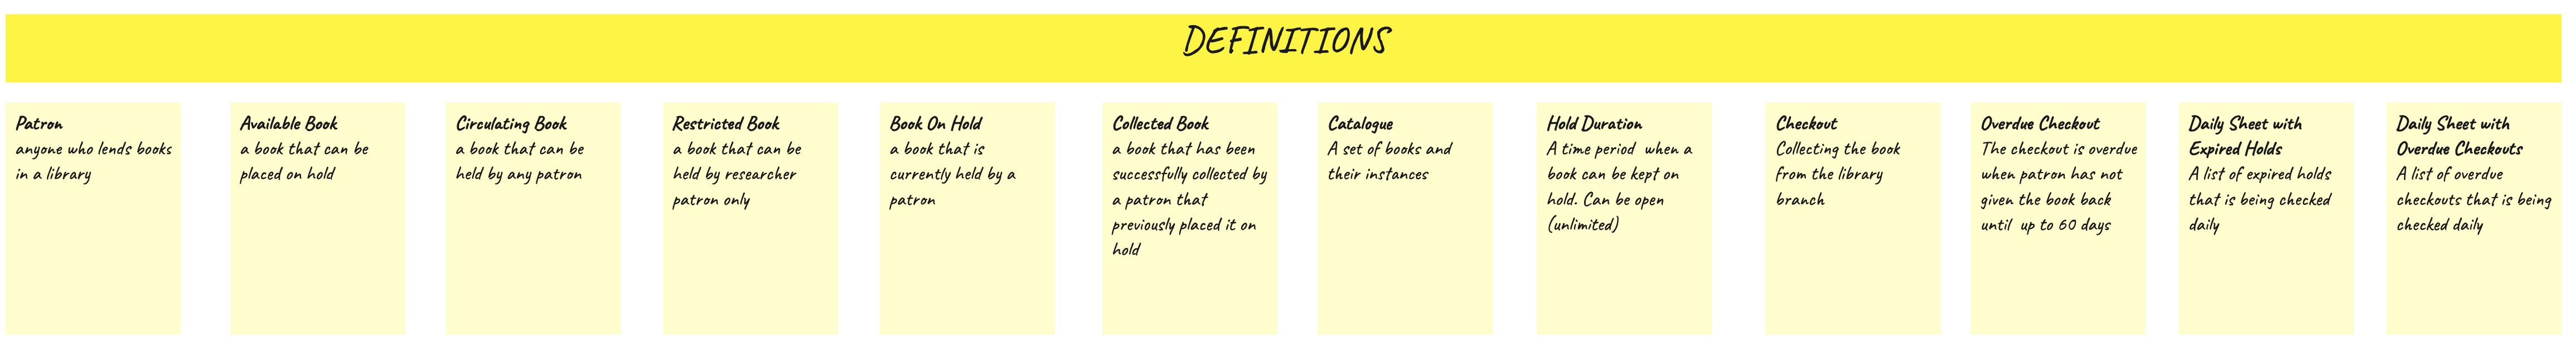 Event Storming Definitions